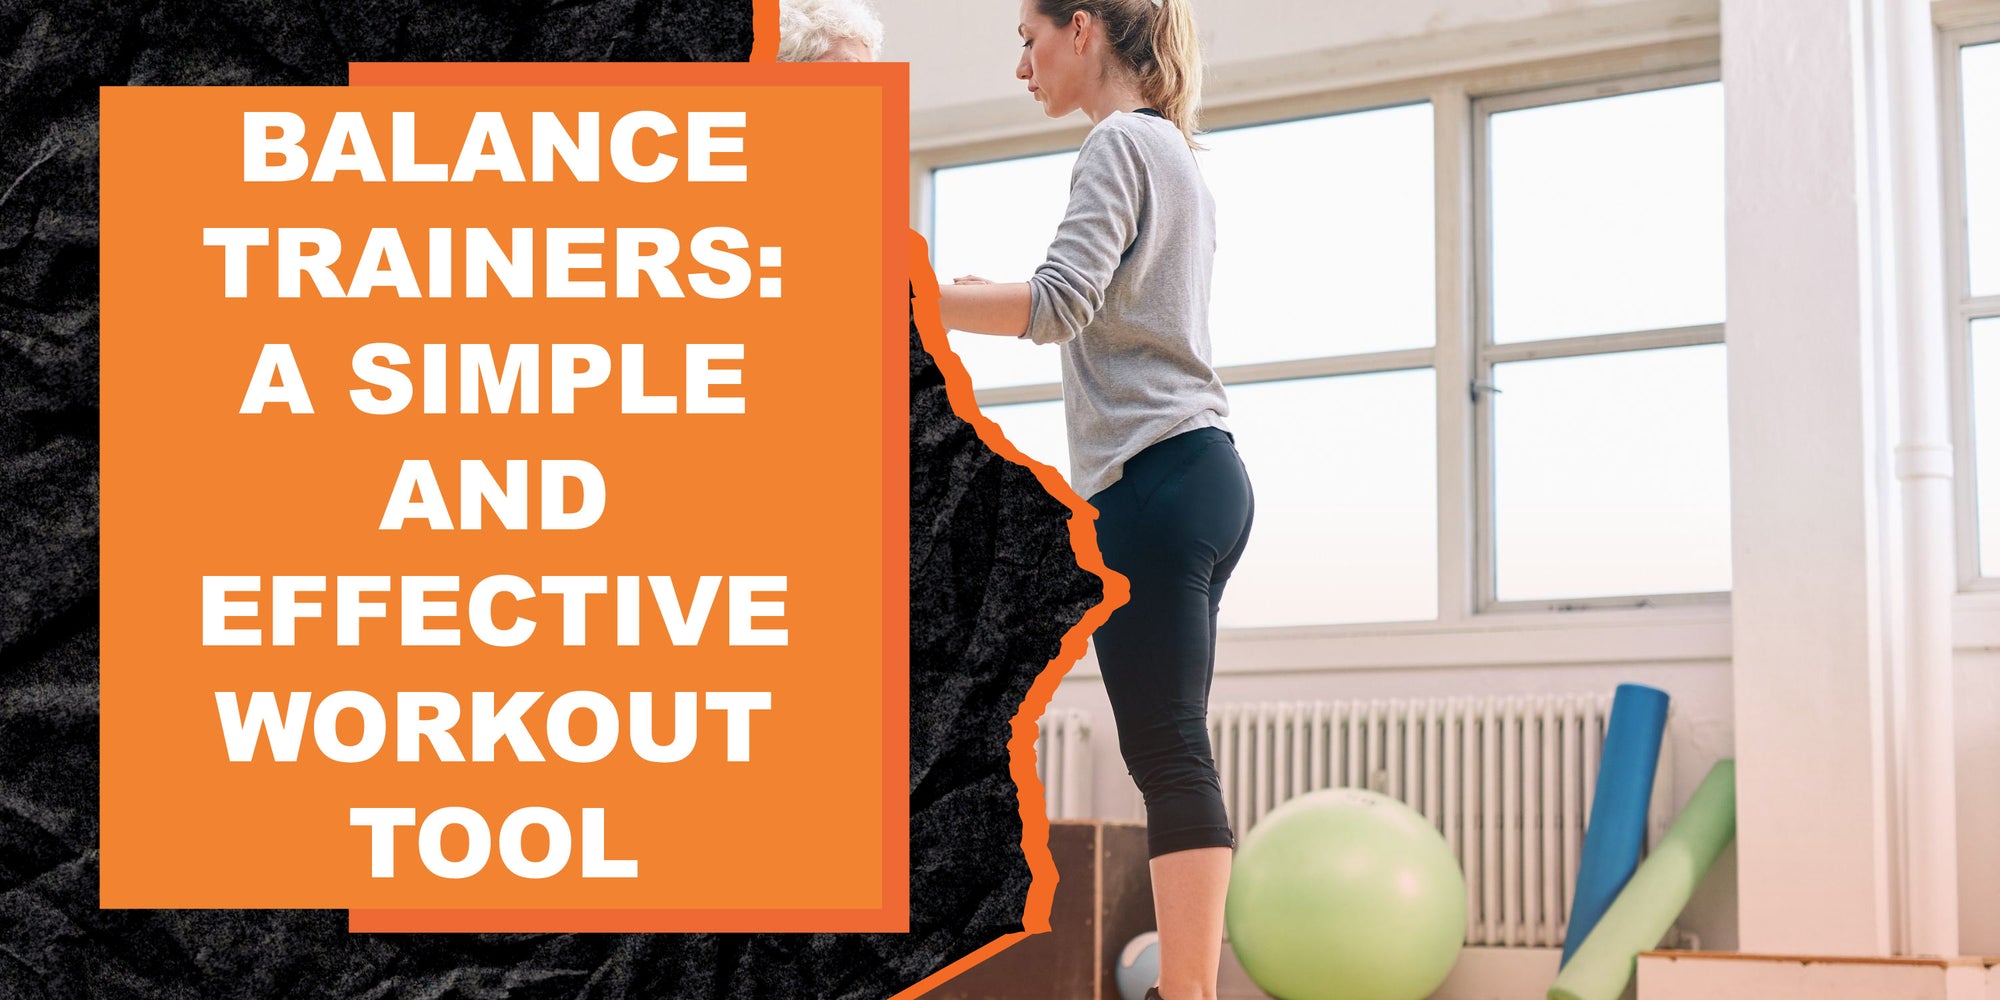 Balance Trainers: A Simple and Effective Workout Tool